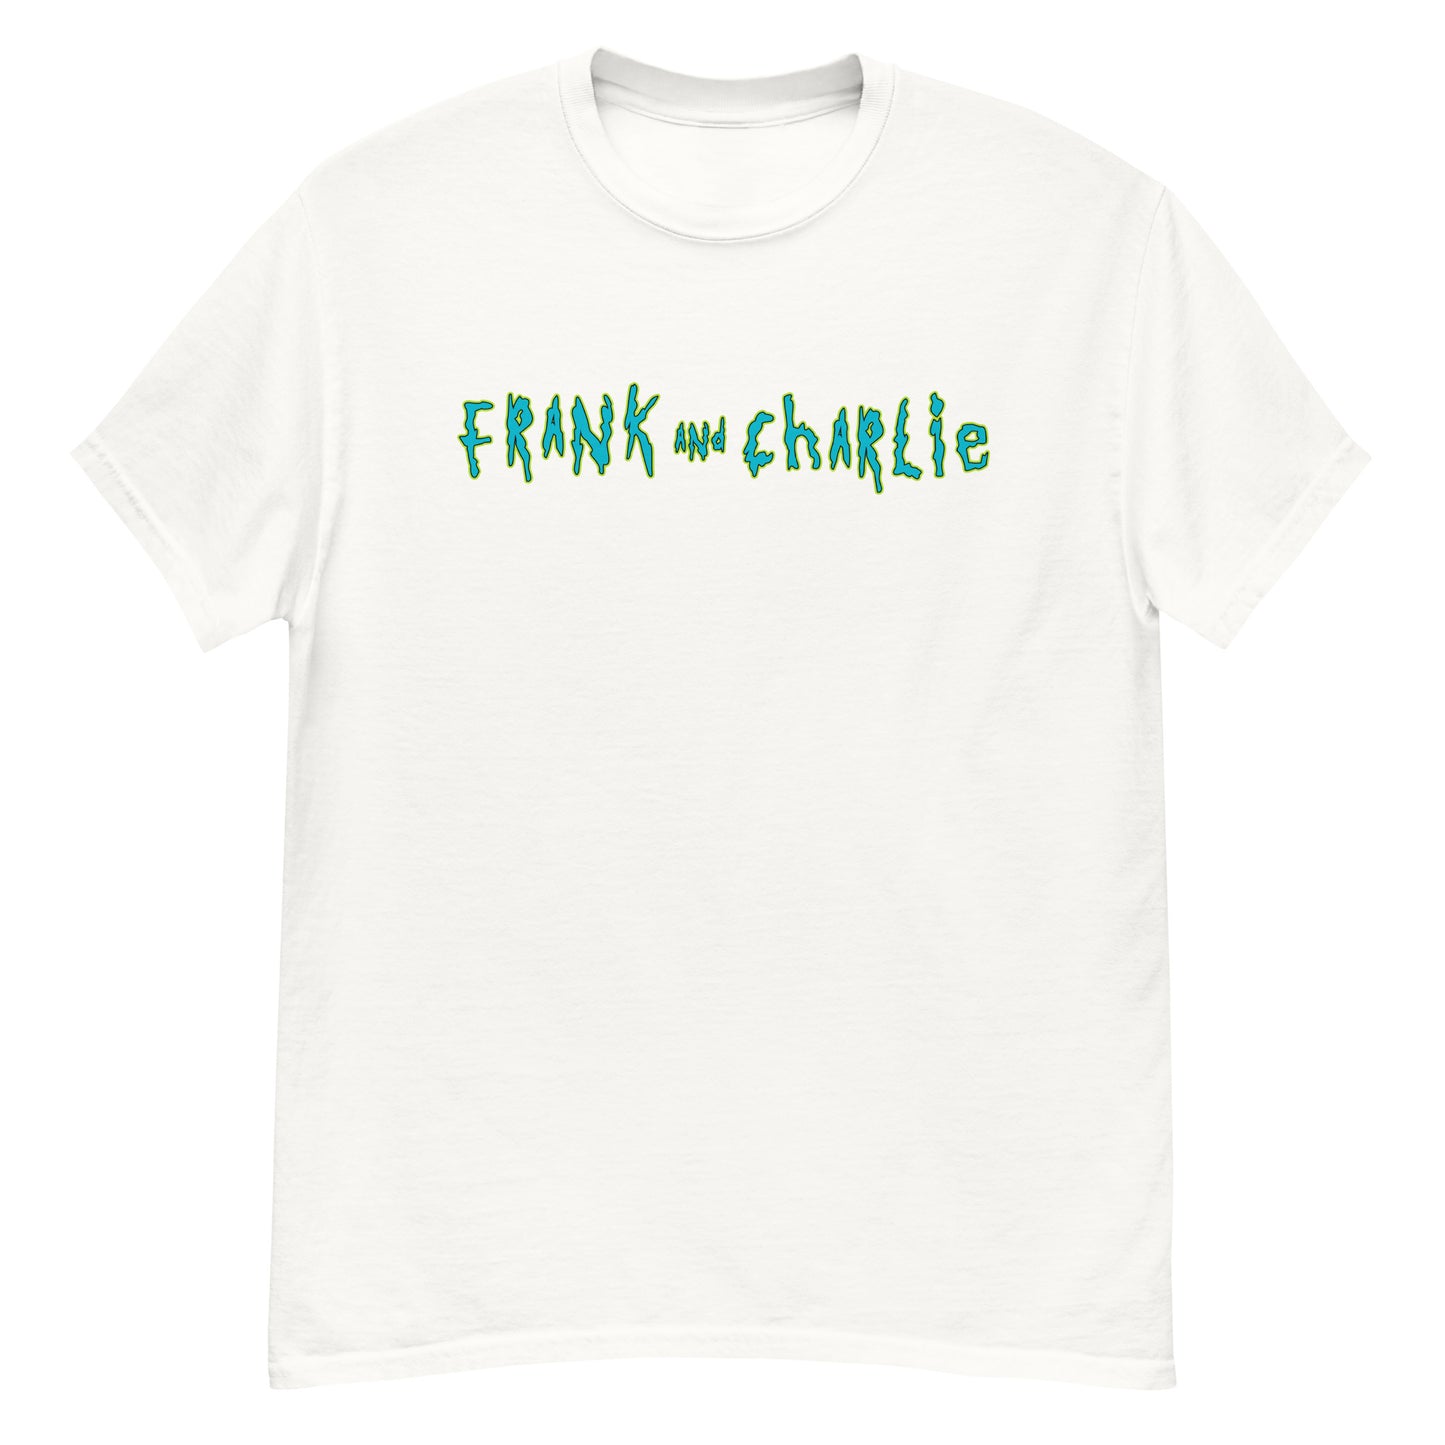 Frank and Charlie (Rick and Morty Parody)  classic tee